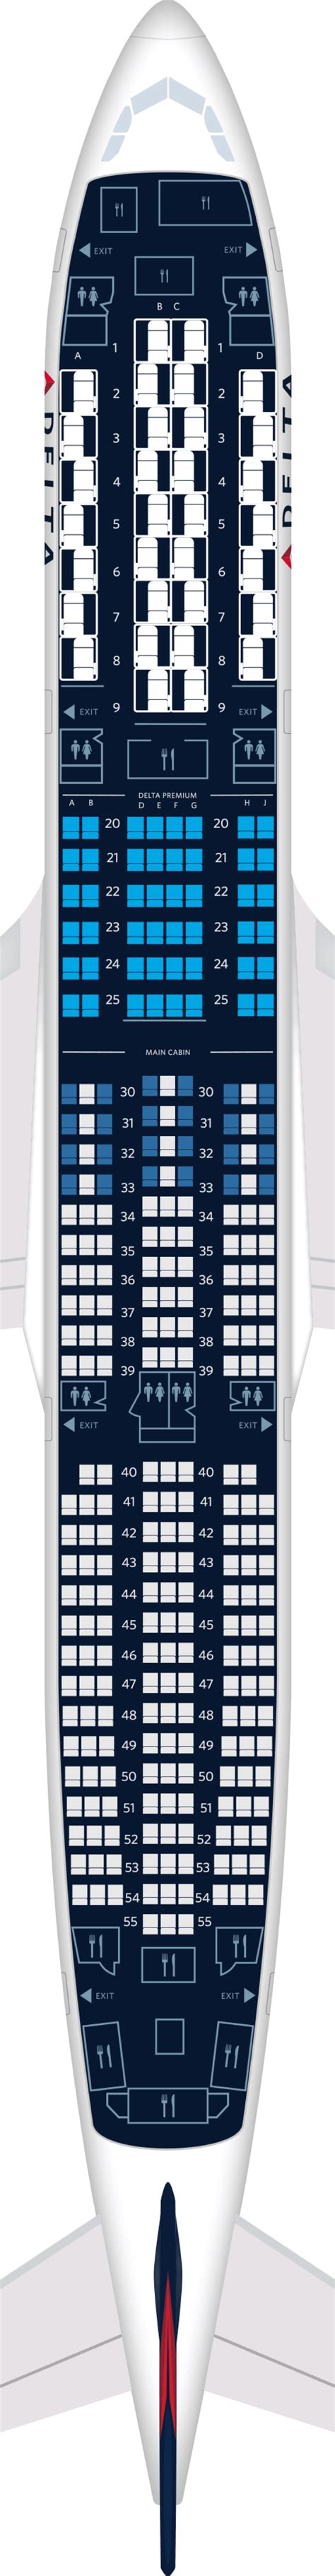 A350 941 seat map. Ferried TLS - MAD 3 Jun 2022 on delivery. EC-NTB. Airbus A350-941. Corendon Dutch Airlines. 26 Jan 2024. Y432. 2x RR Trent XWB-84. 347245. leased from World2Fly. 